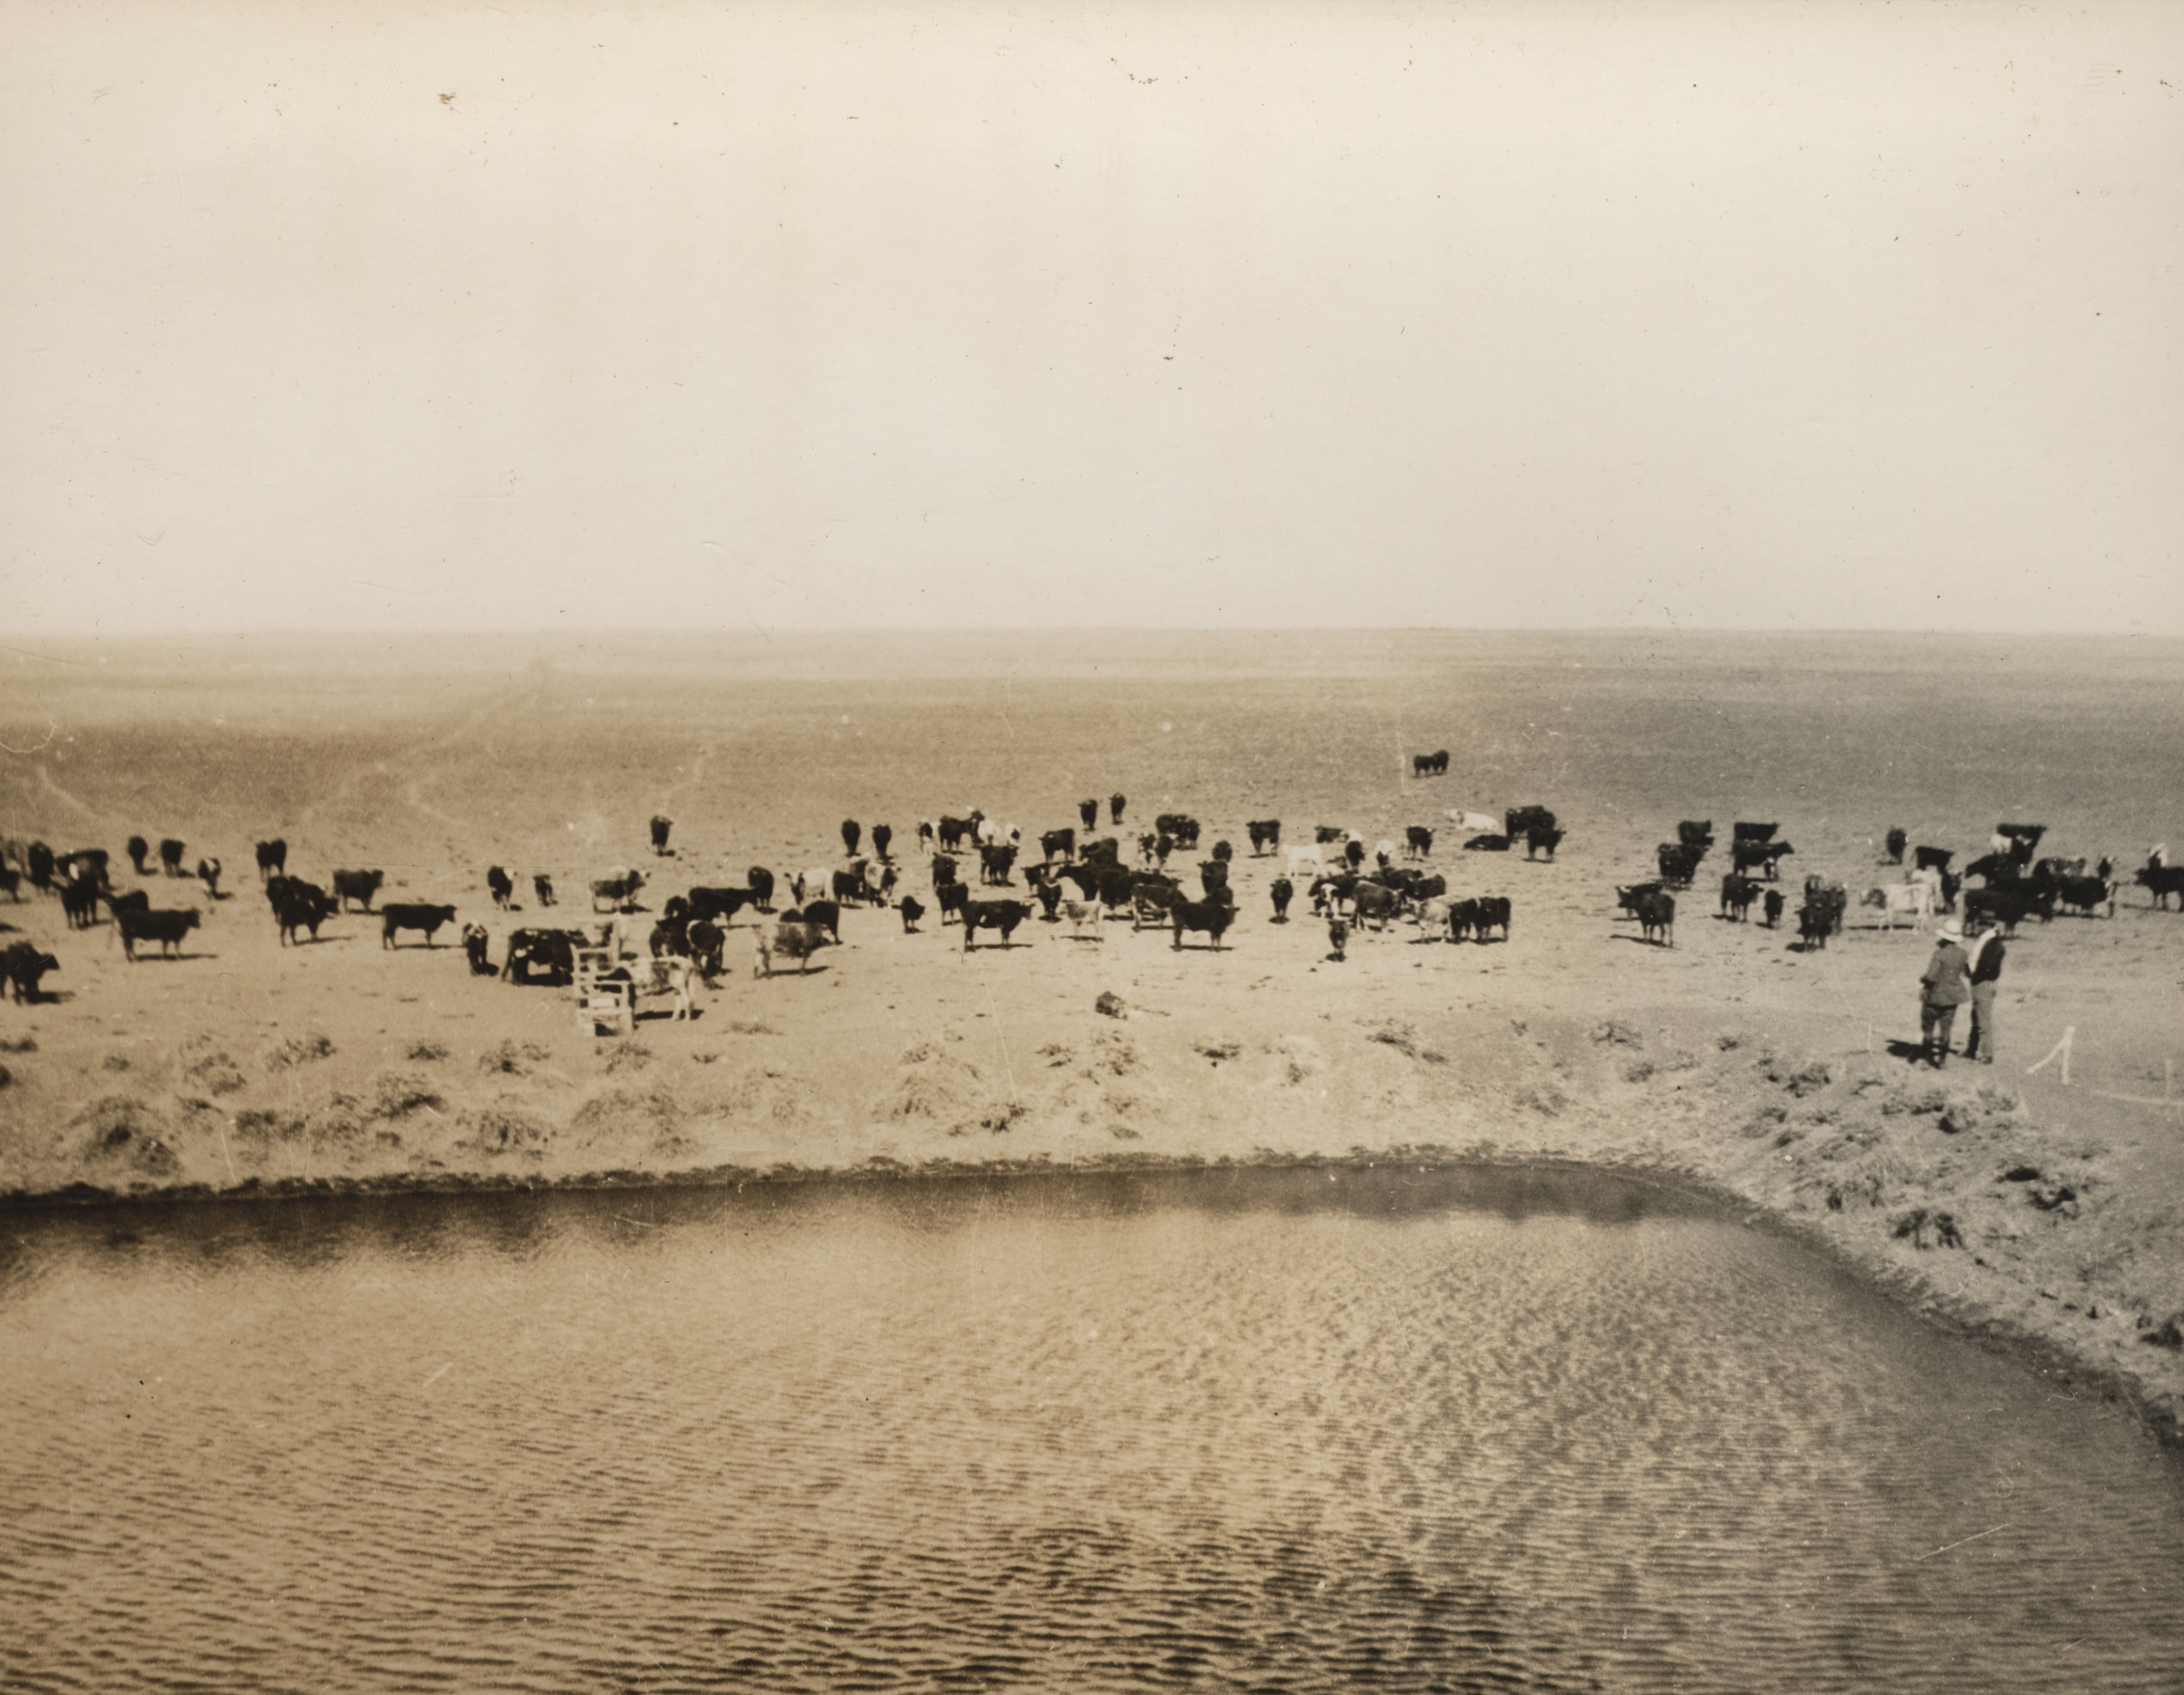 Cattle at the Paradise Bore, Brunette Downs Station, Northern Territory, 24 July 1934 (Z241-211).